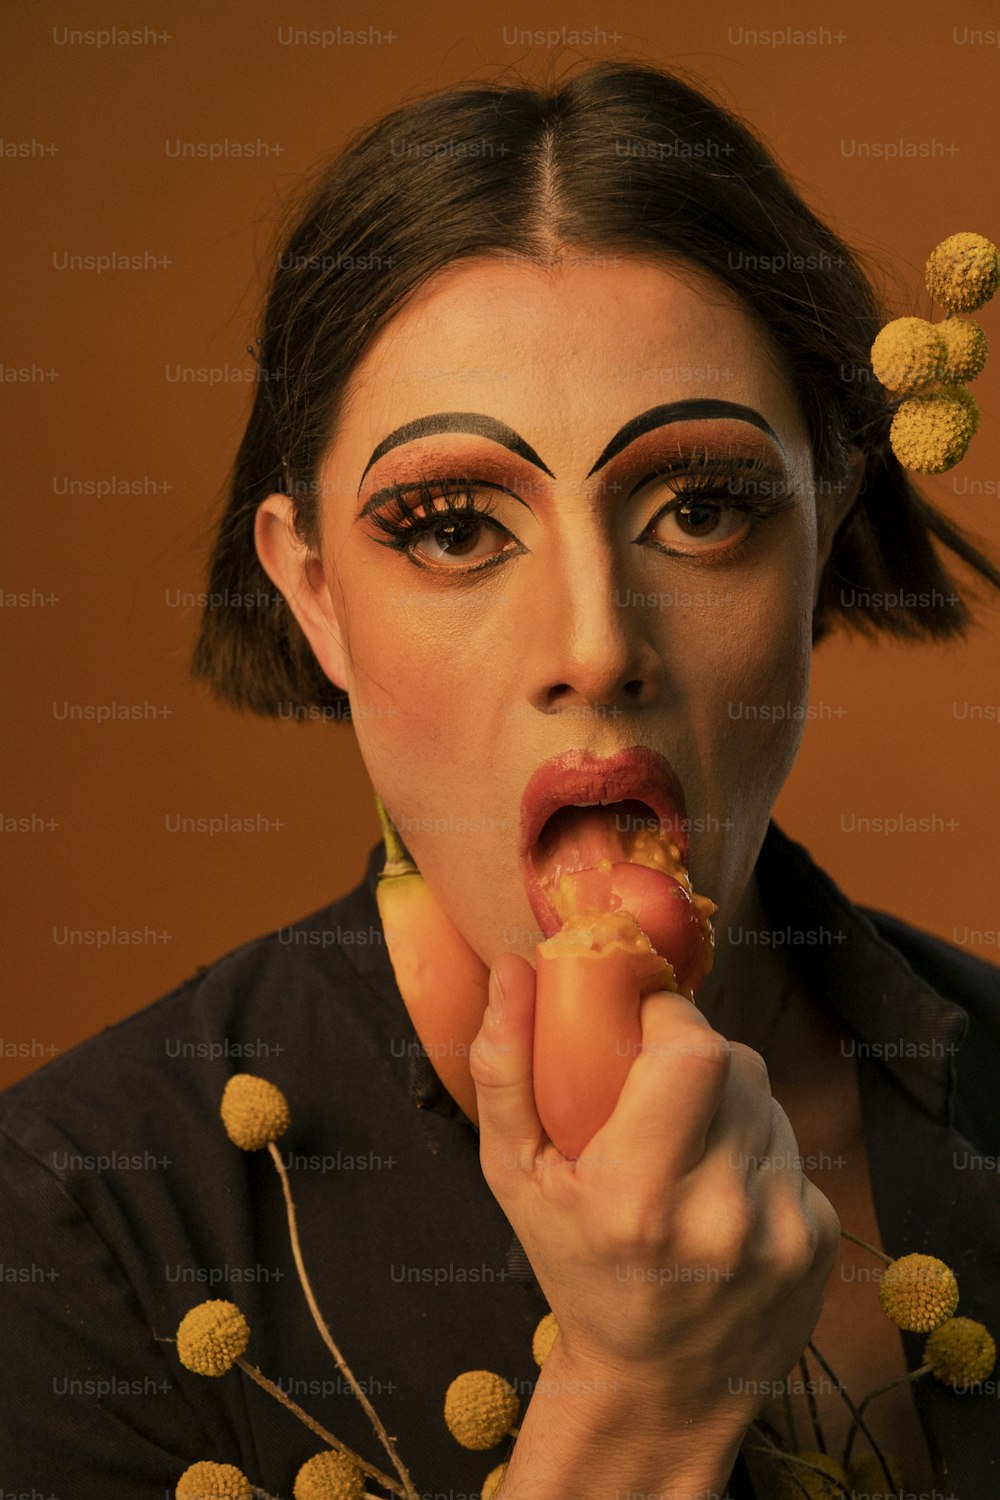 a woman with makeup on her face eating a piece of food